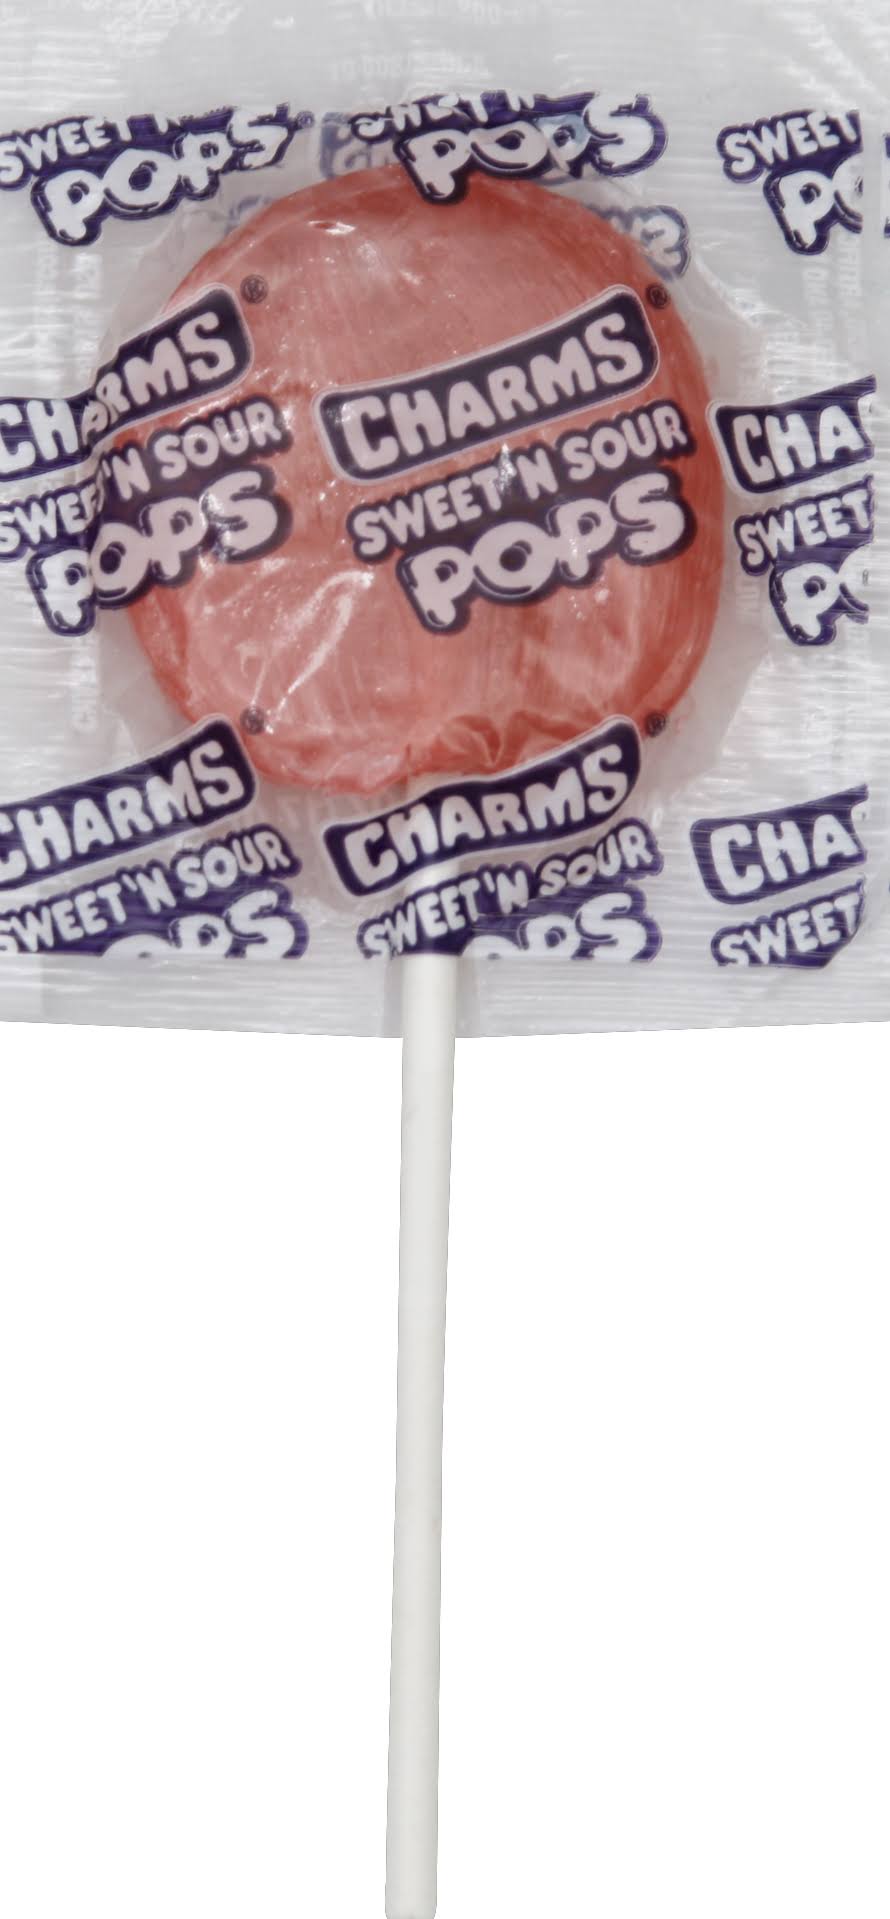 Charms Sweet 'N Sour Pops